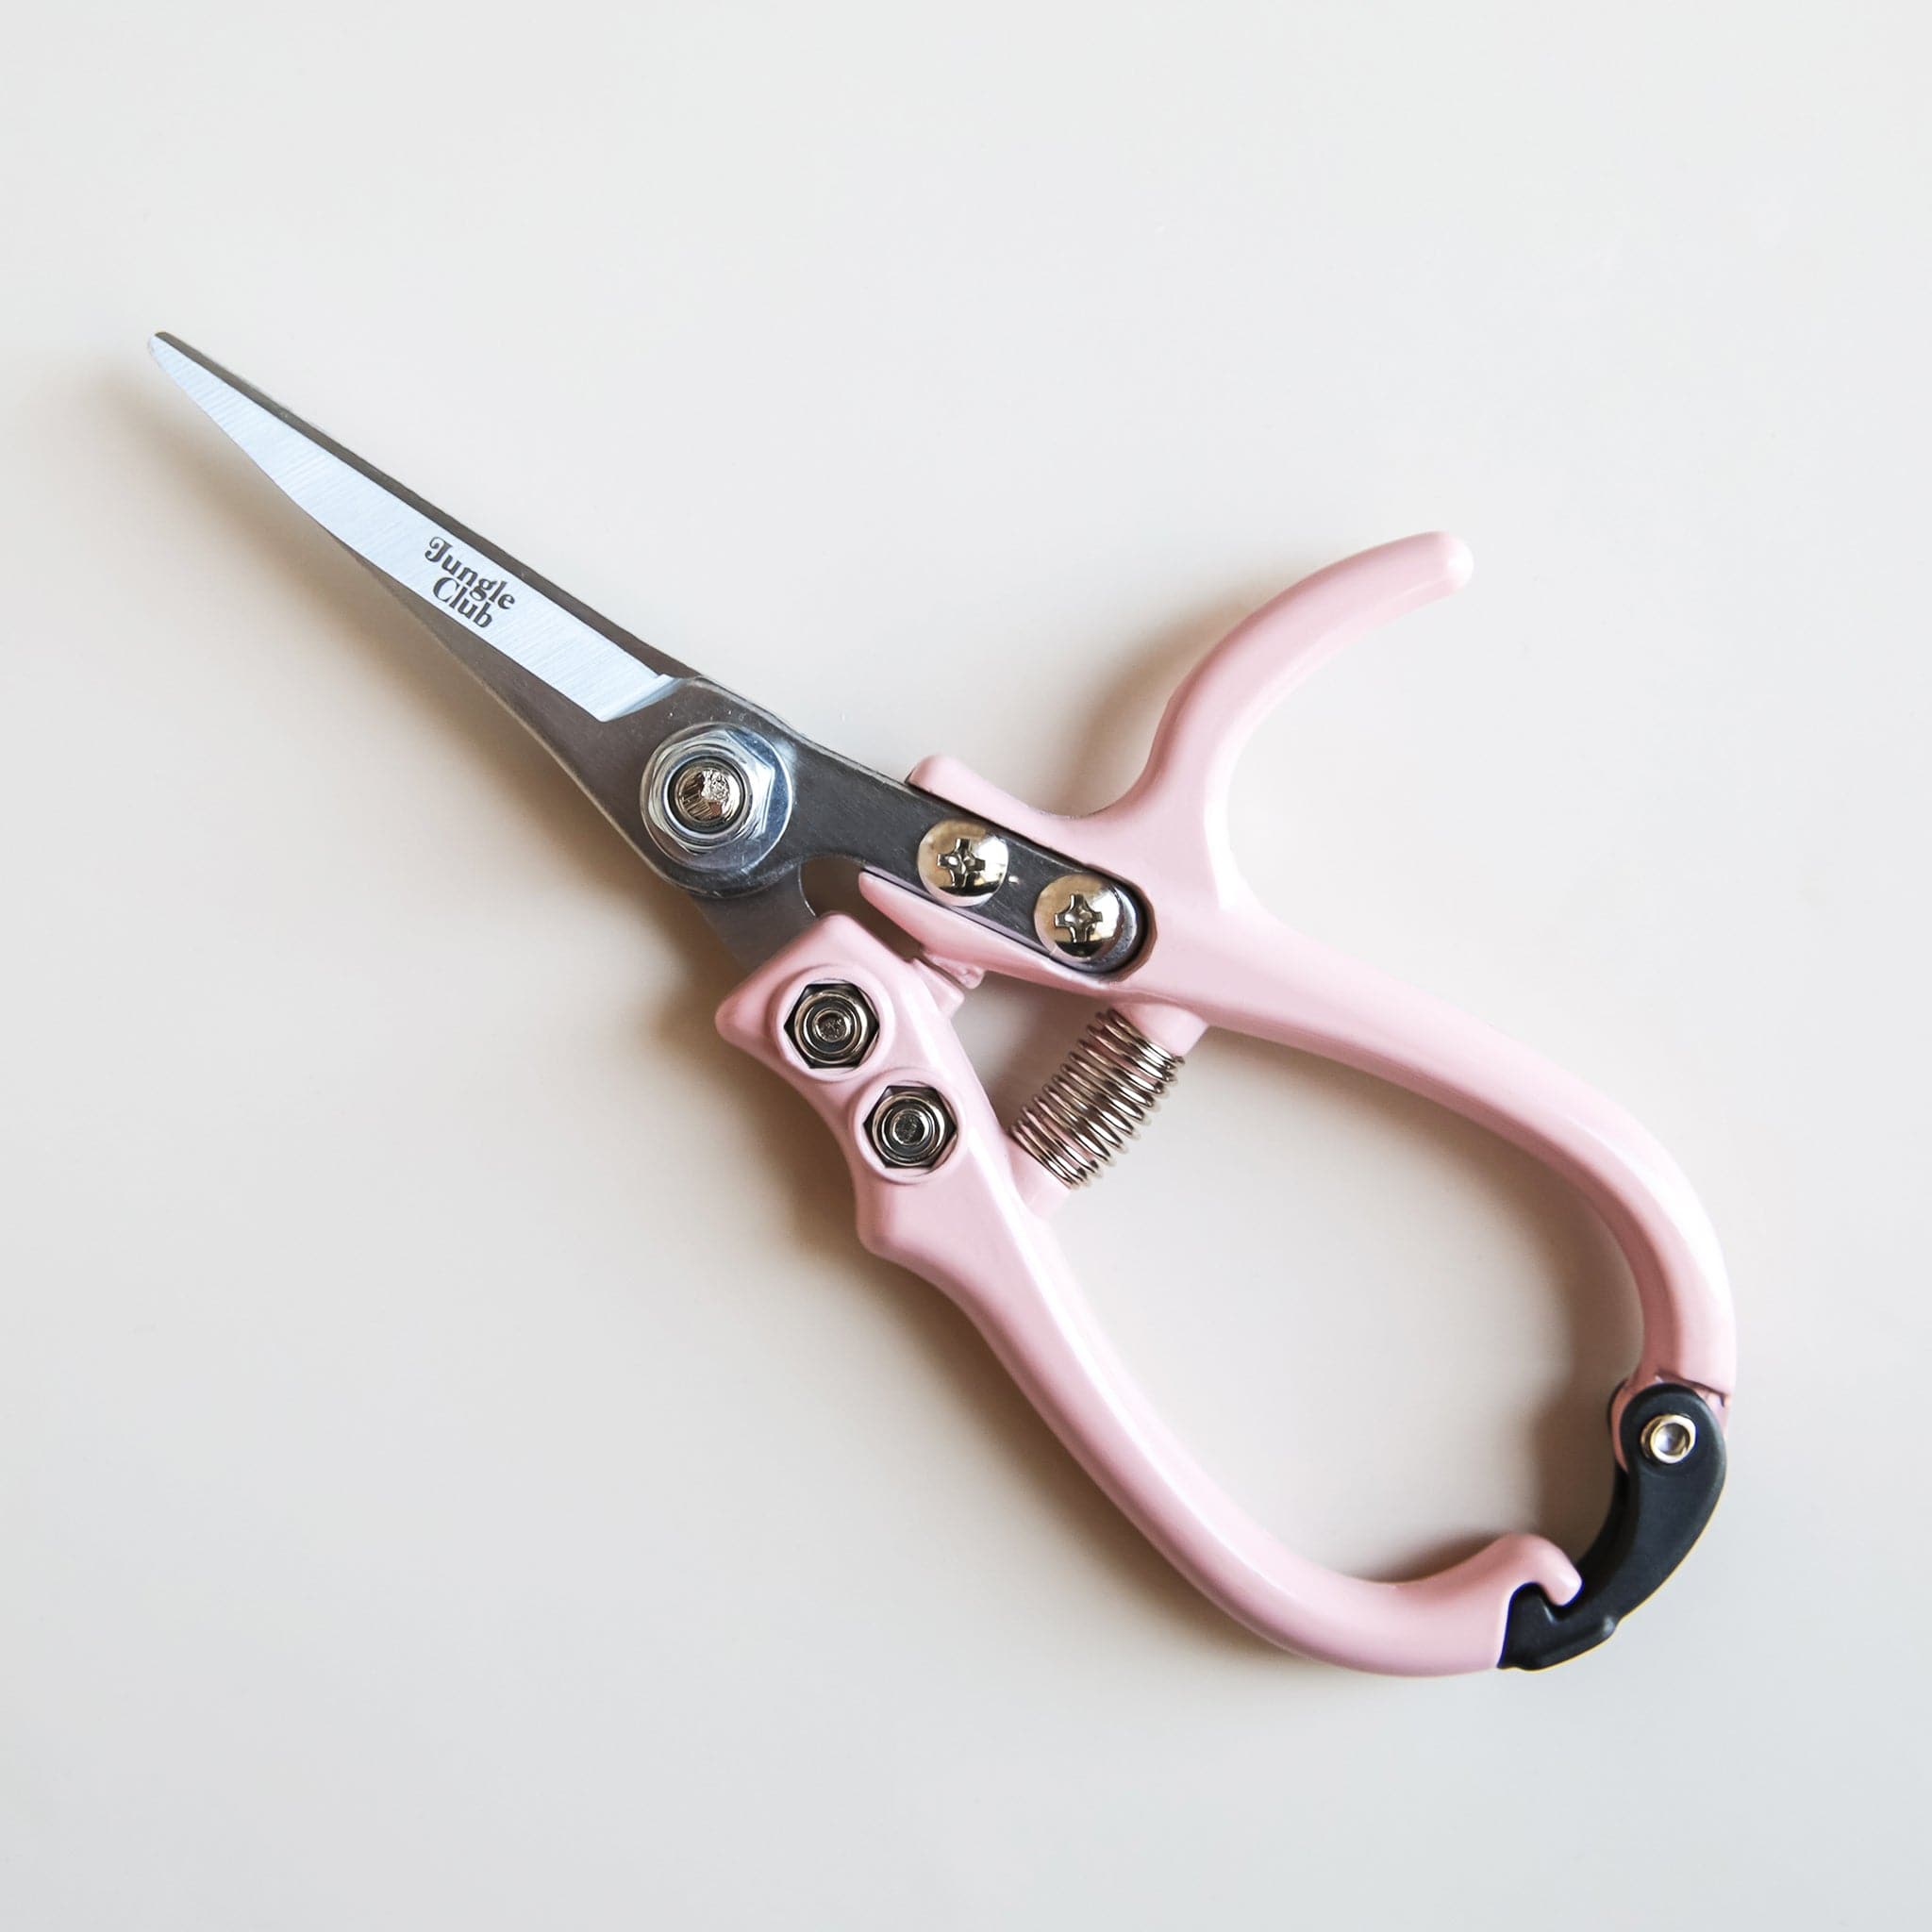 Pair of pruning shears with pastel pink handles and metal blades. The outer blade reads &#39;jungle club&#39; in small, playful lettering. The pruning shears have a black clasp at the top of the handles to secure them closed. 